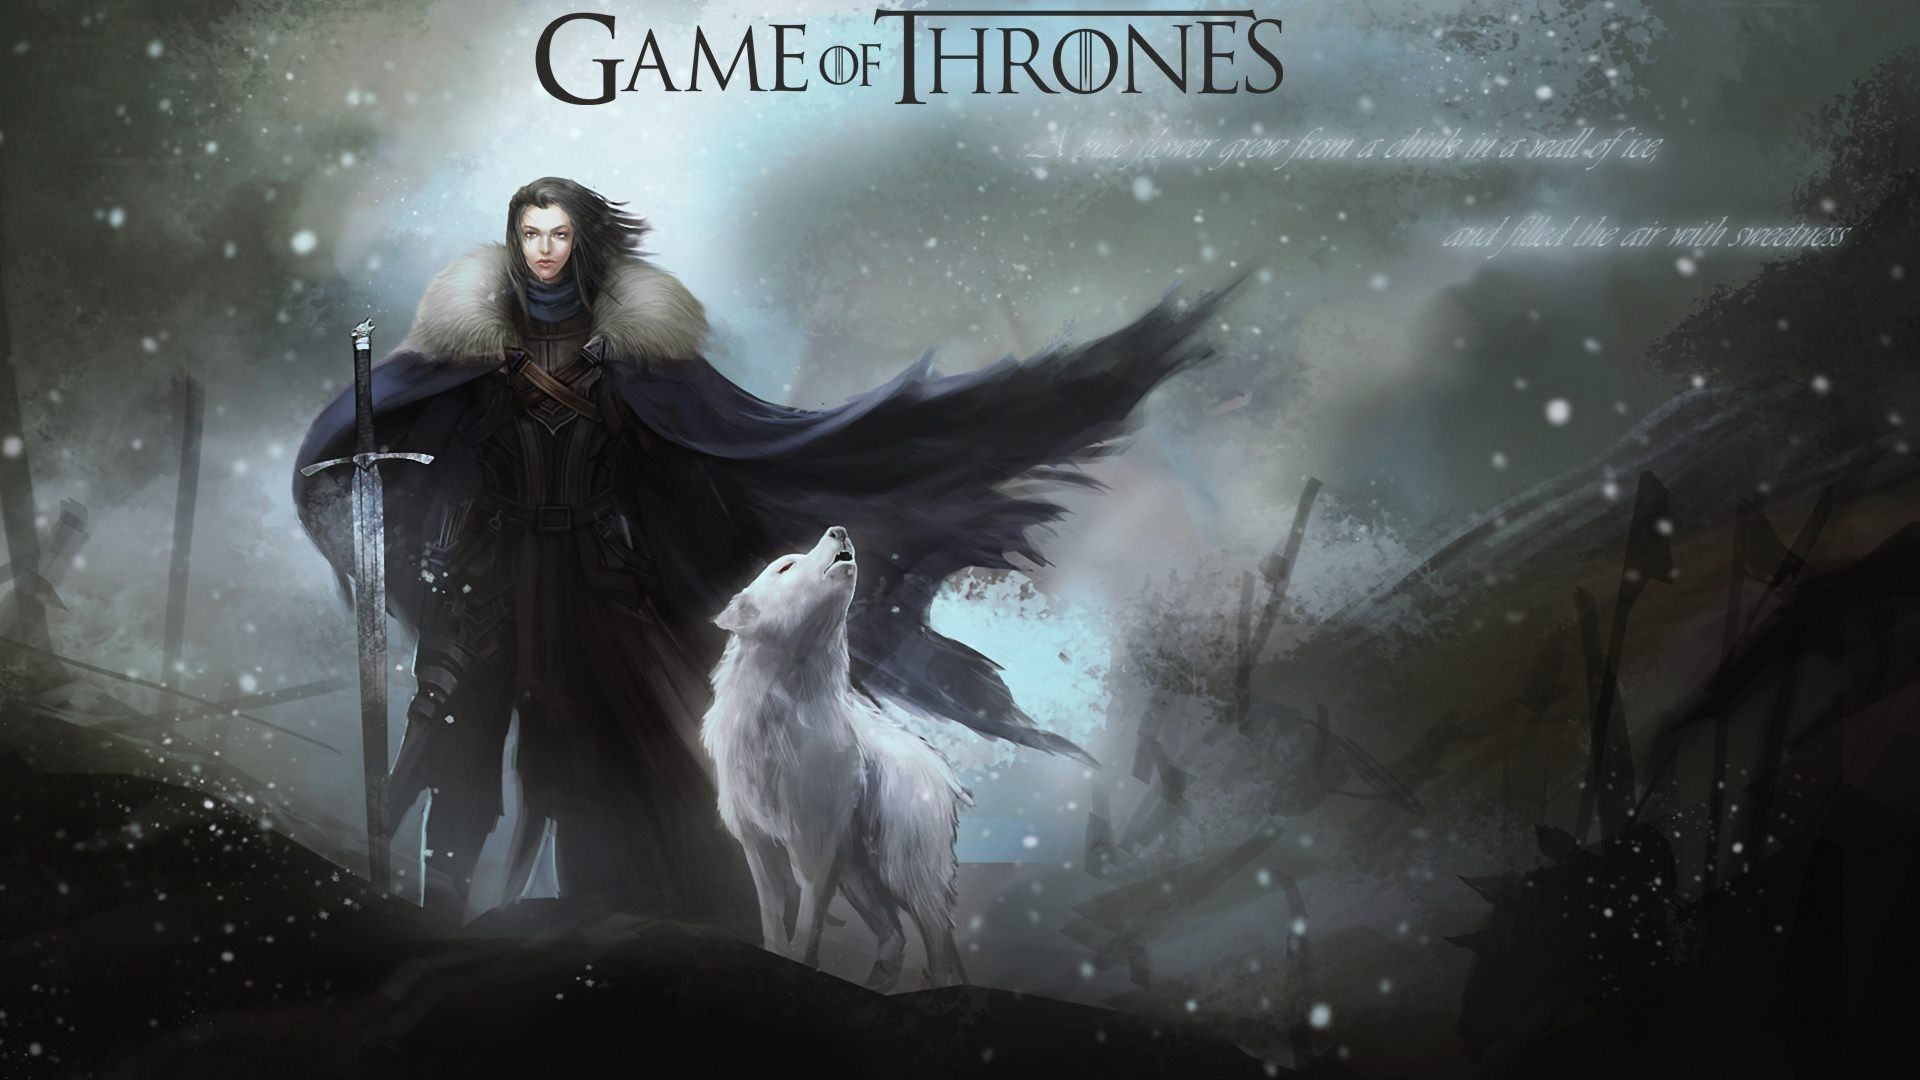 The Winds of Winter Release Story Details Hints by GRRM